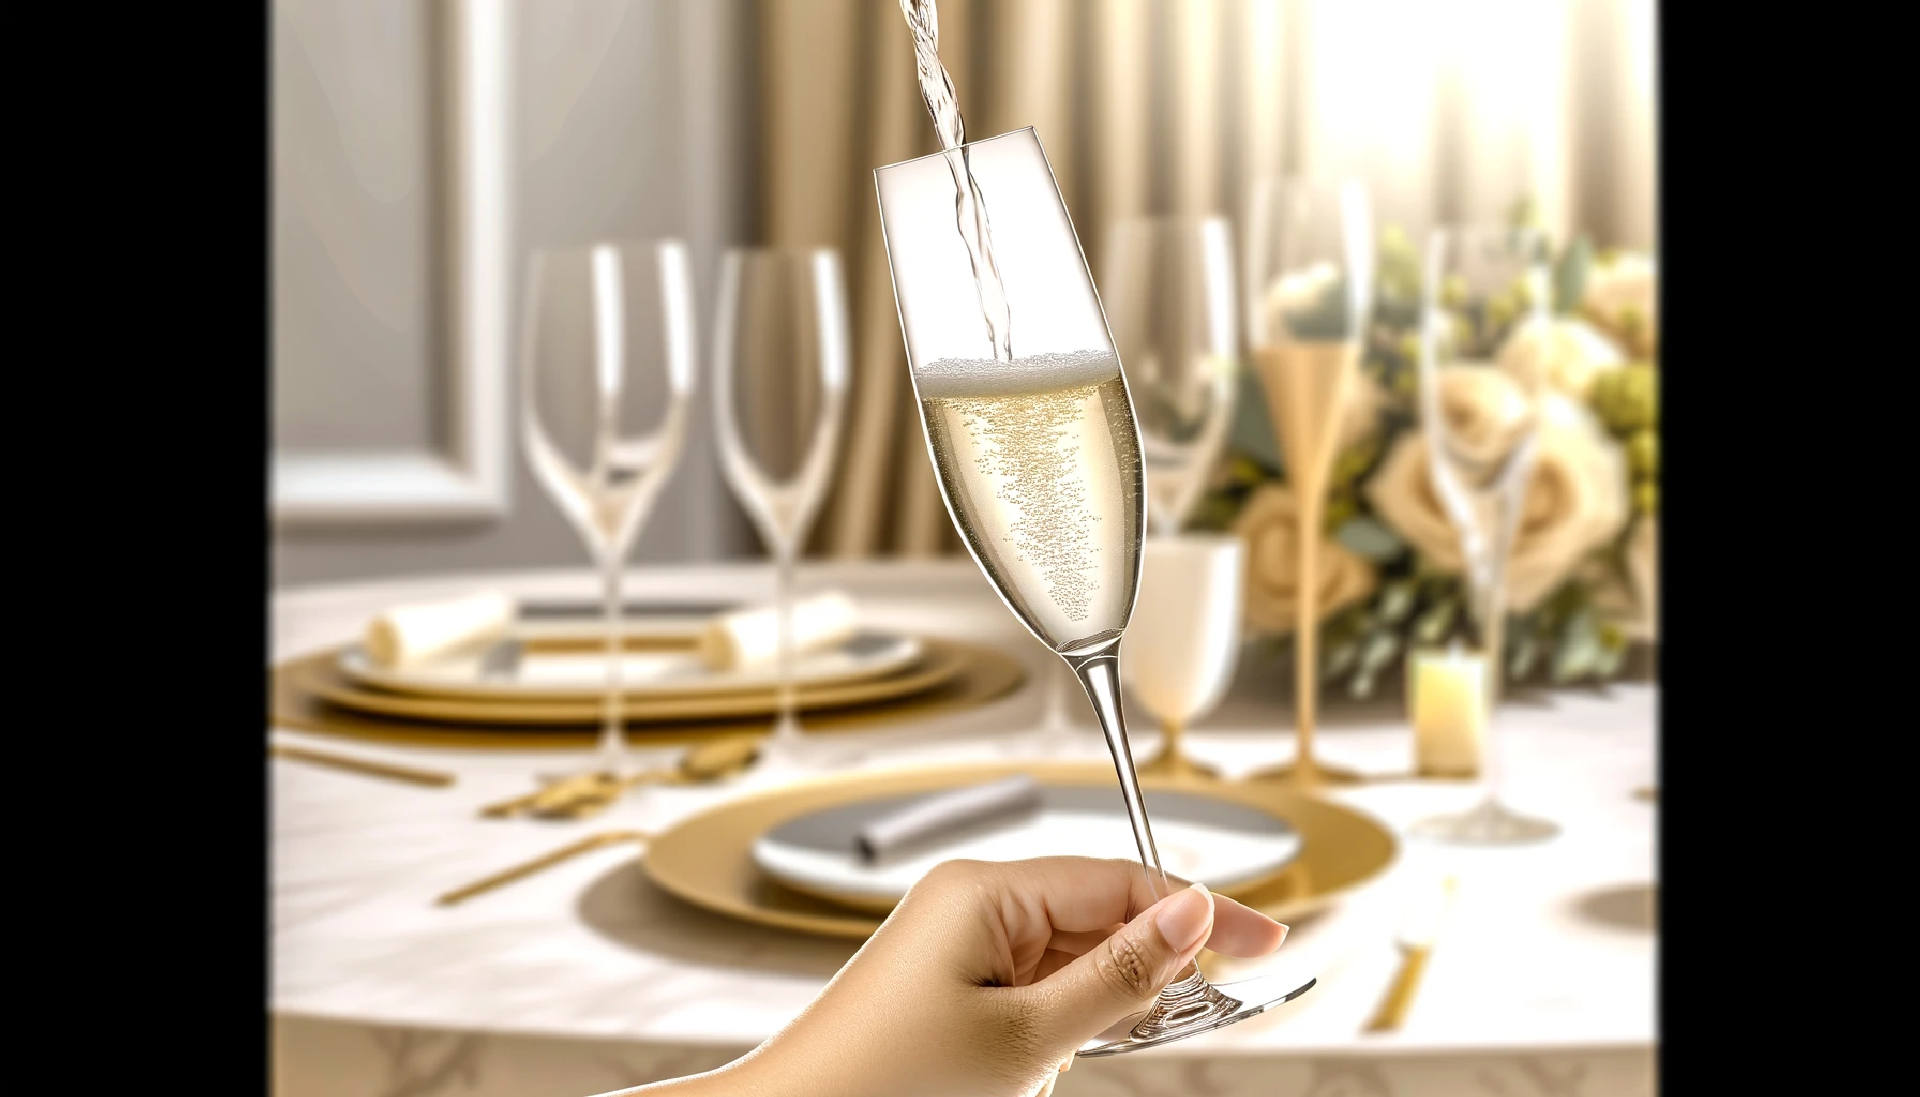 Guide on how to serve sparkling wine elegantly, featuring a chilled bottle and fluted glasses ready for pouring.